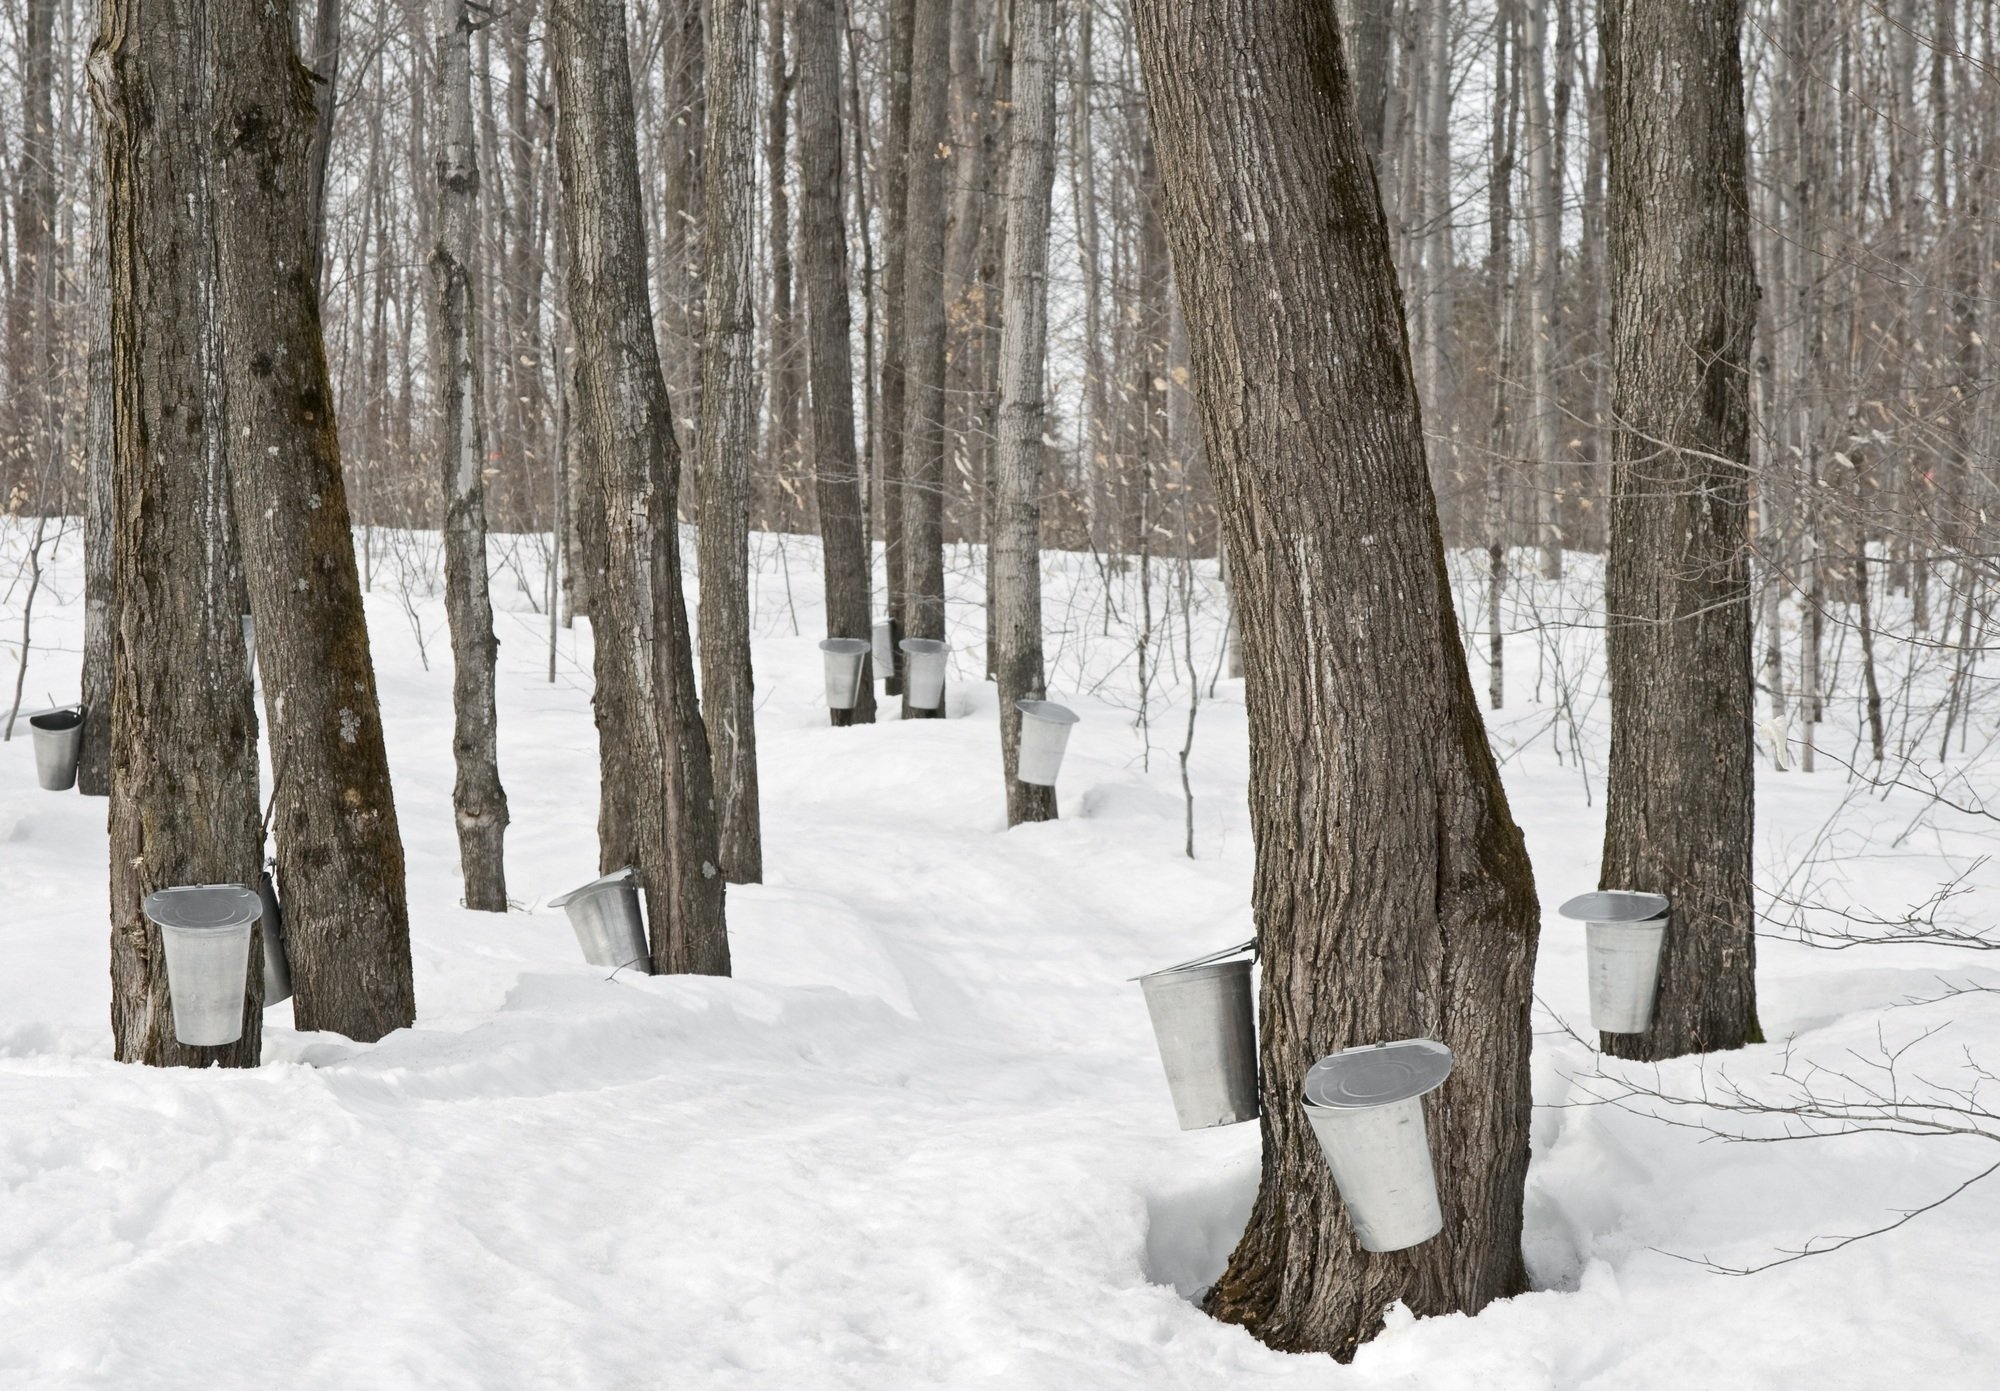 Maple sap is collected in buckets once the trees are tapped